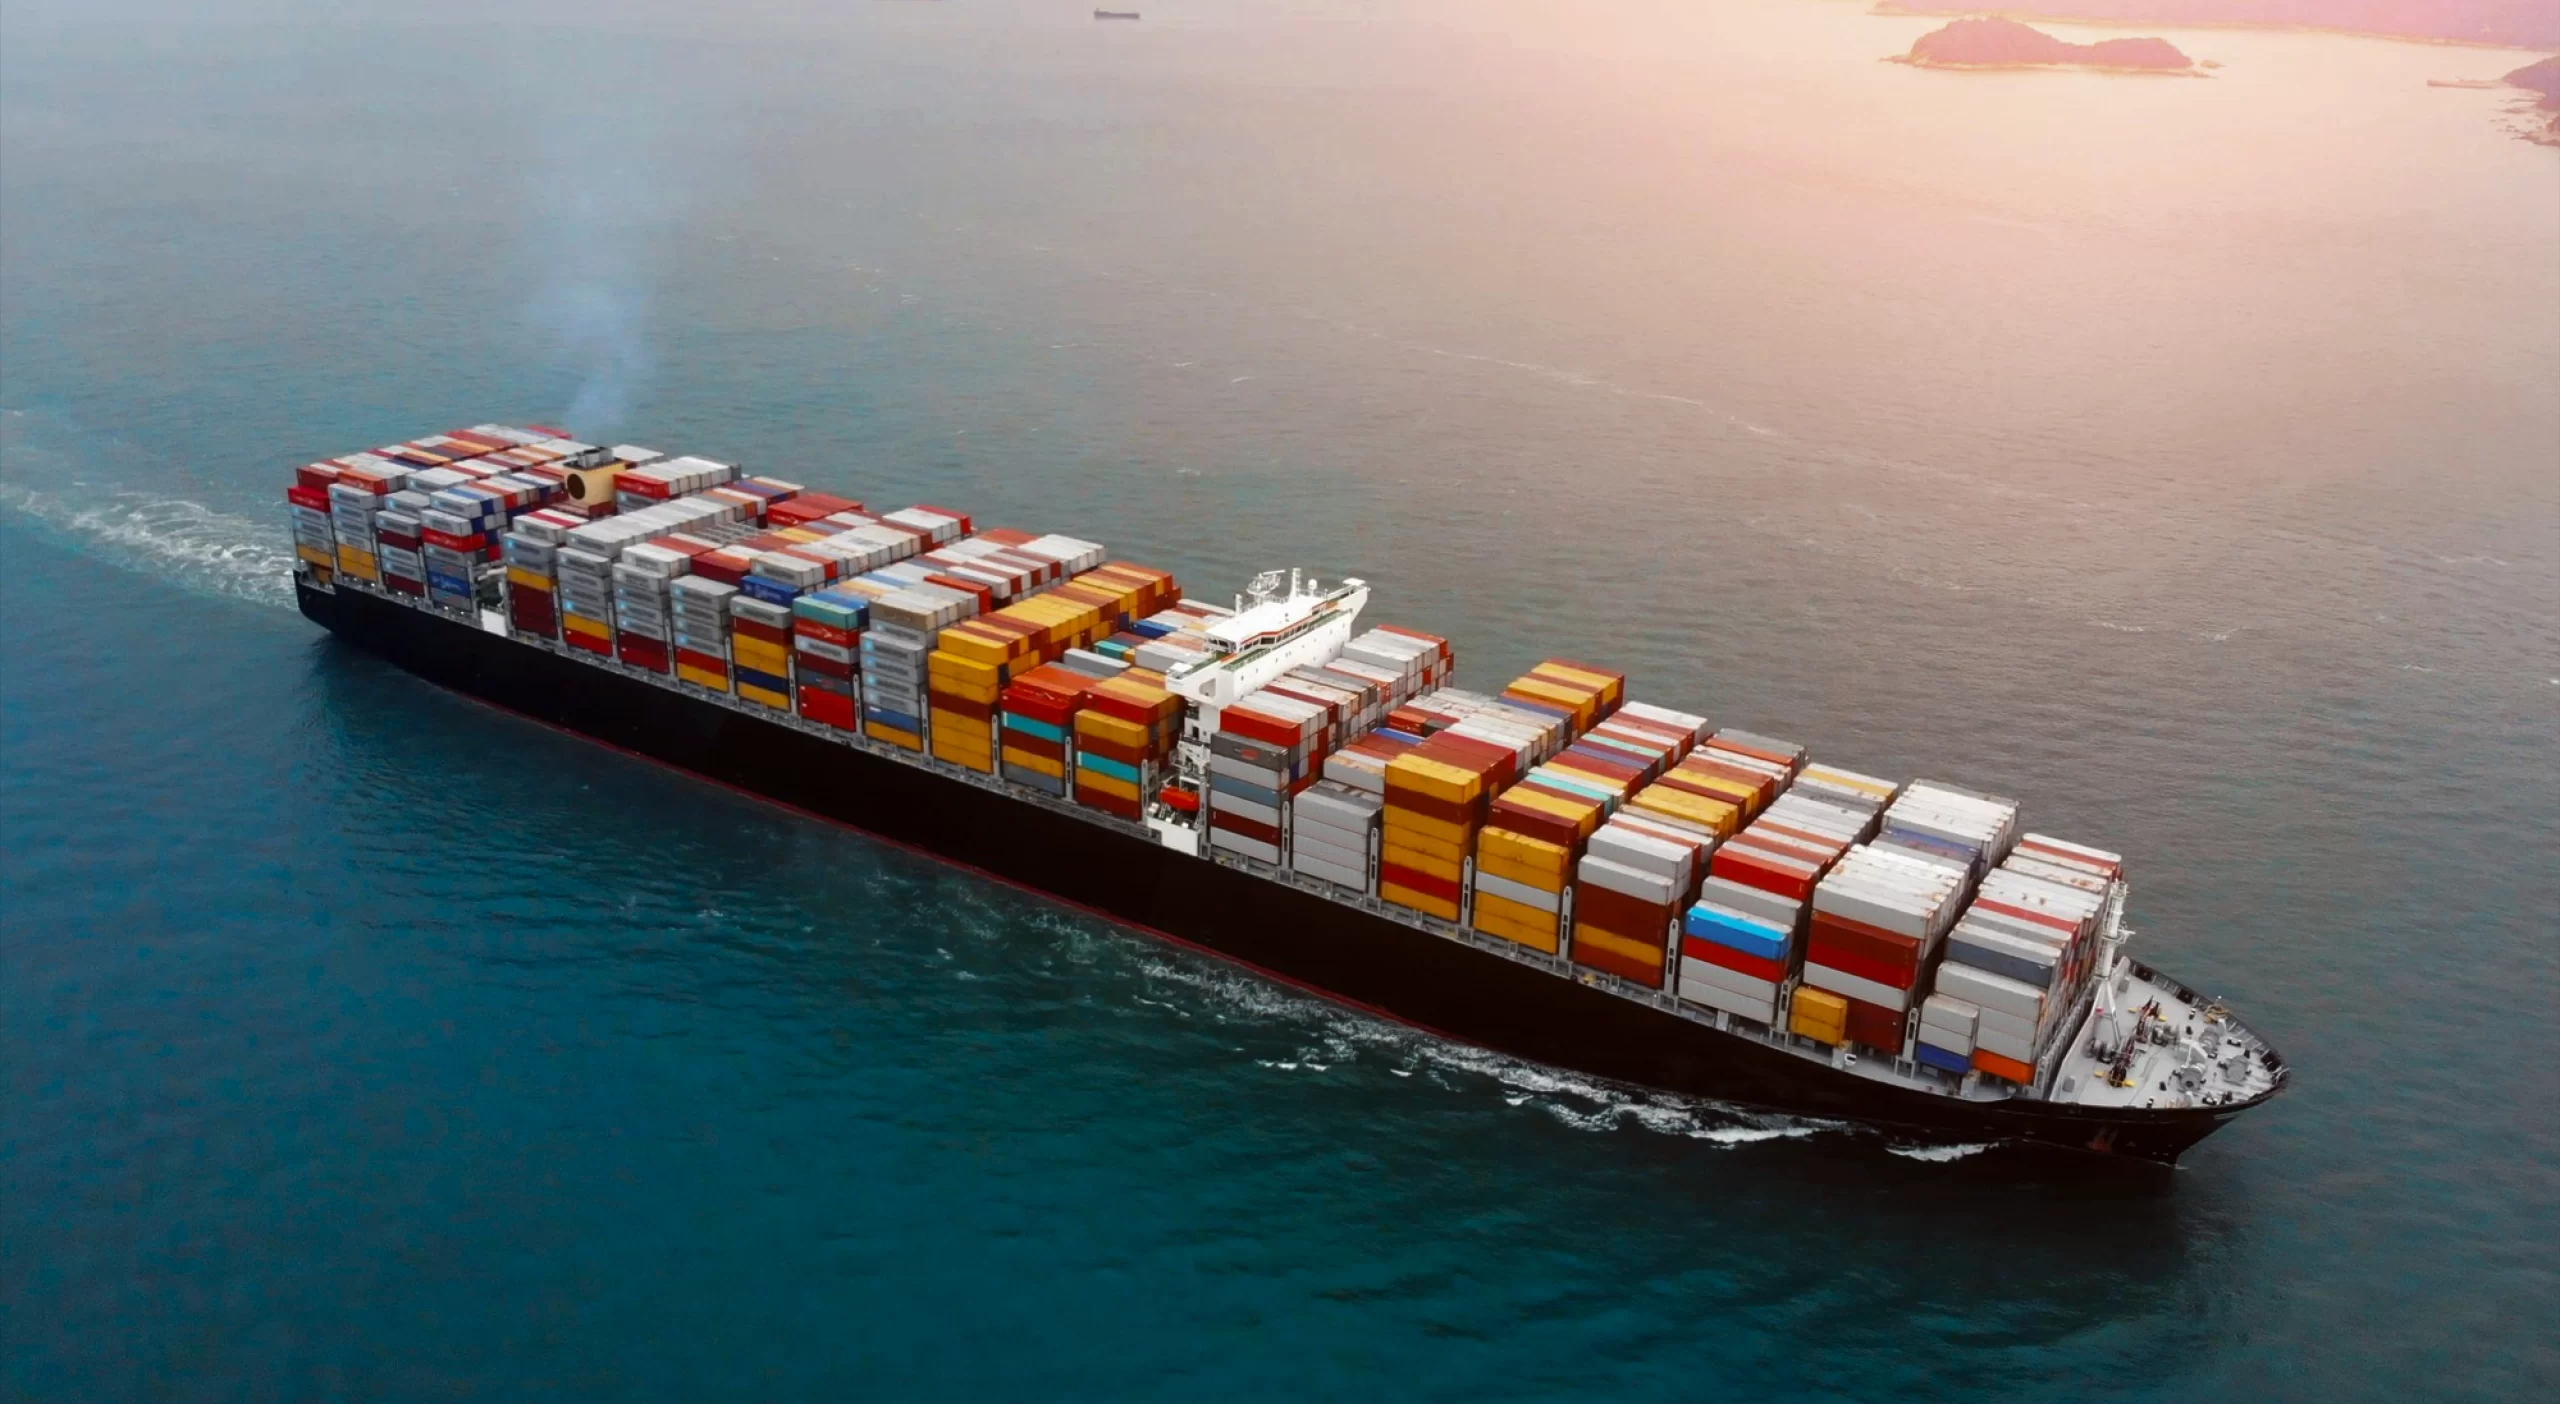 An aerial view of a massive container ship navigating the ocean for sea freight transportation.